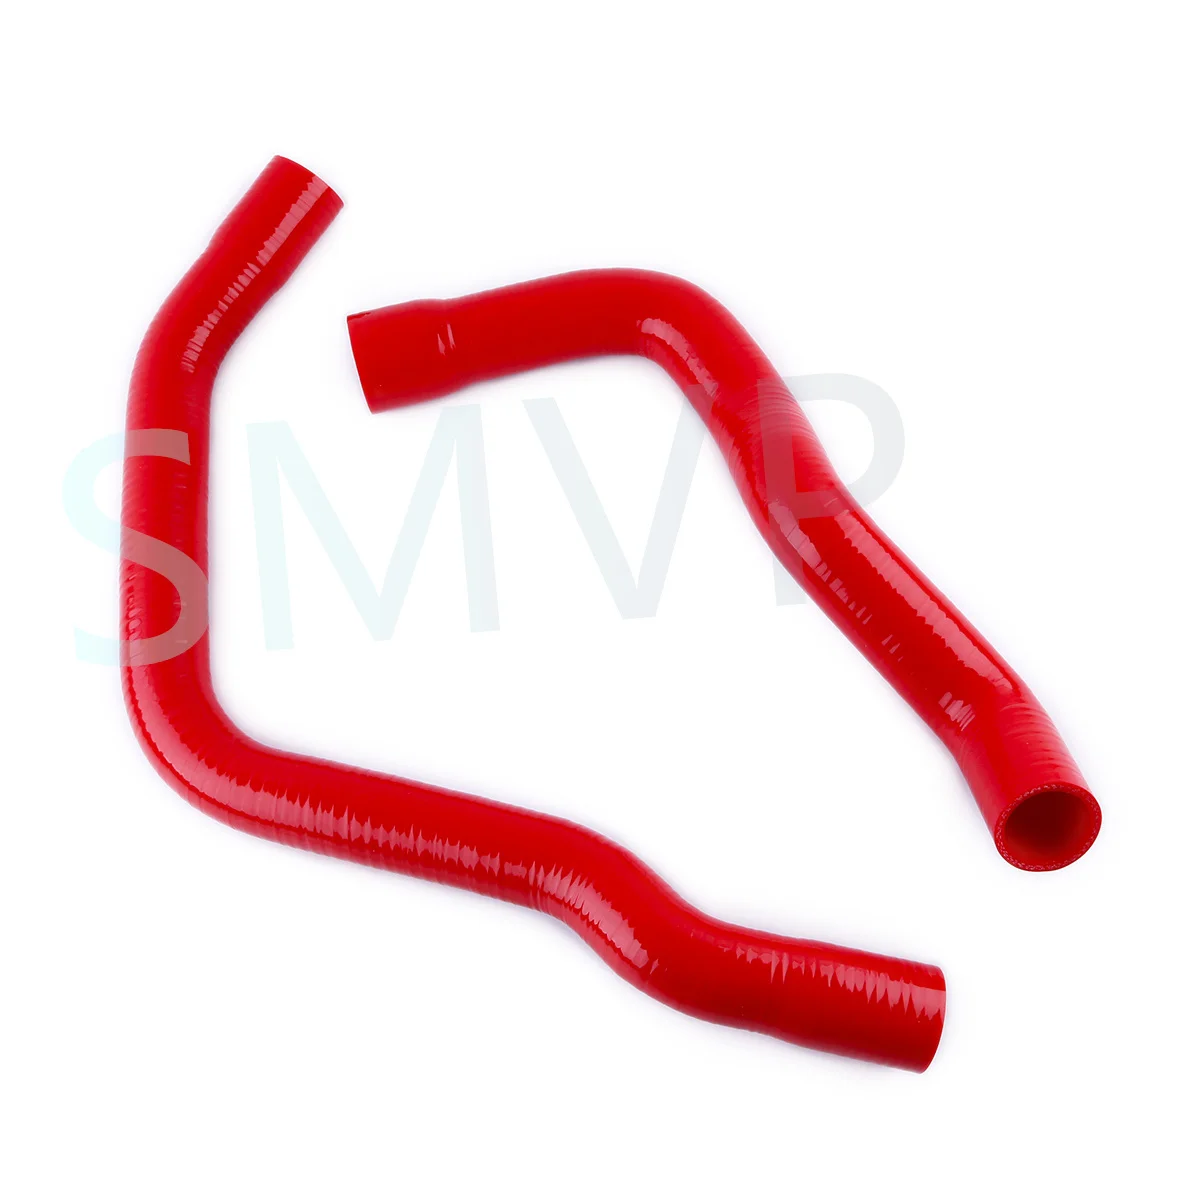 

2PCS Silicone Radiator Coolant Hoses For Buick Regal 1981-1987 Kit 3-Ply Replacement Performance Parts 1982 1983 1984 1985 1986